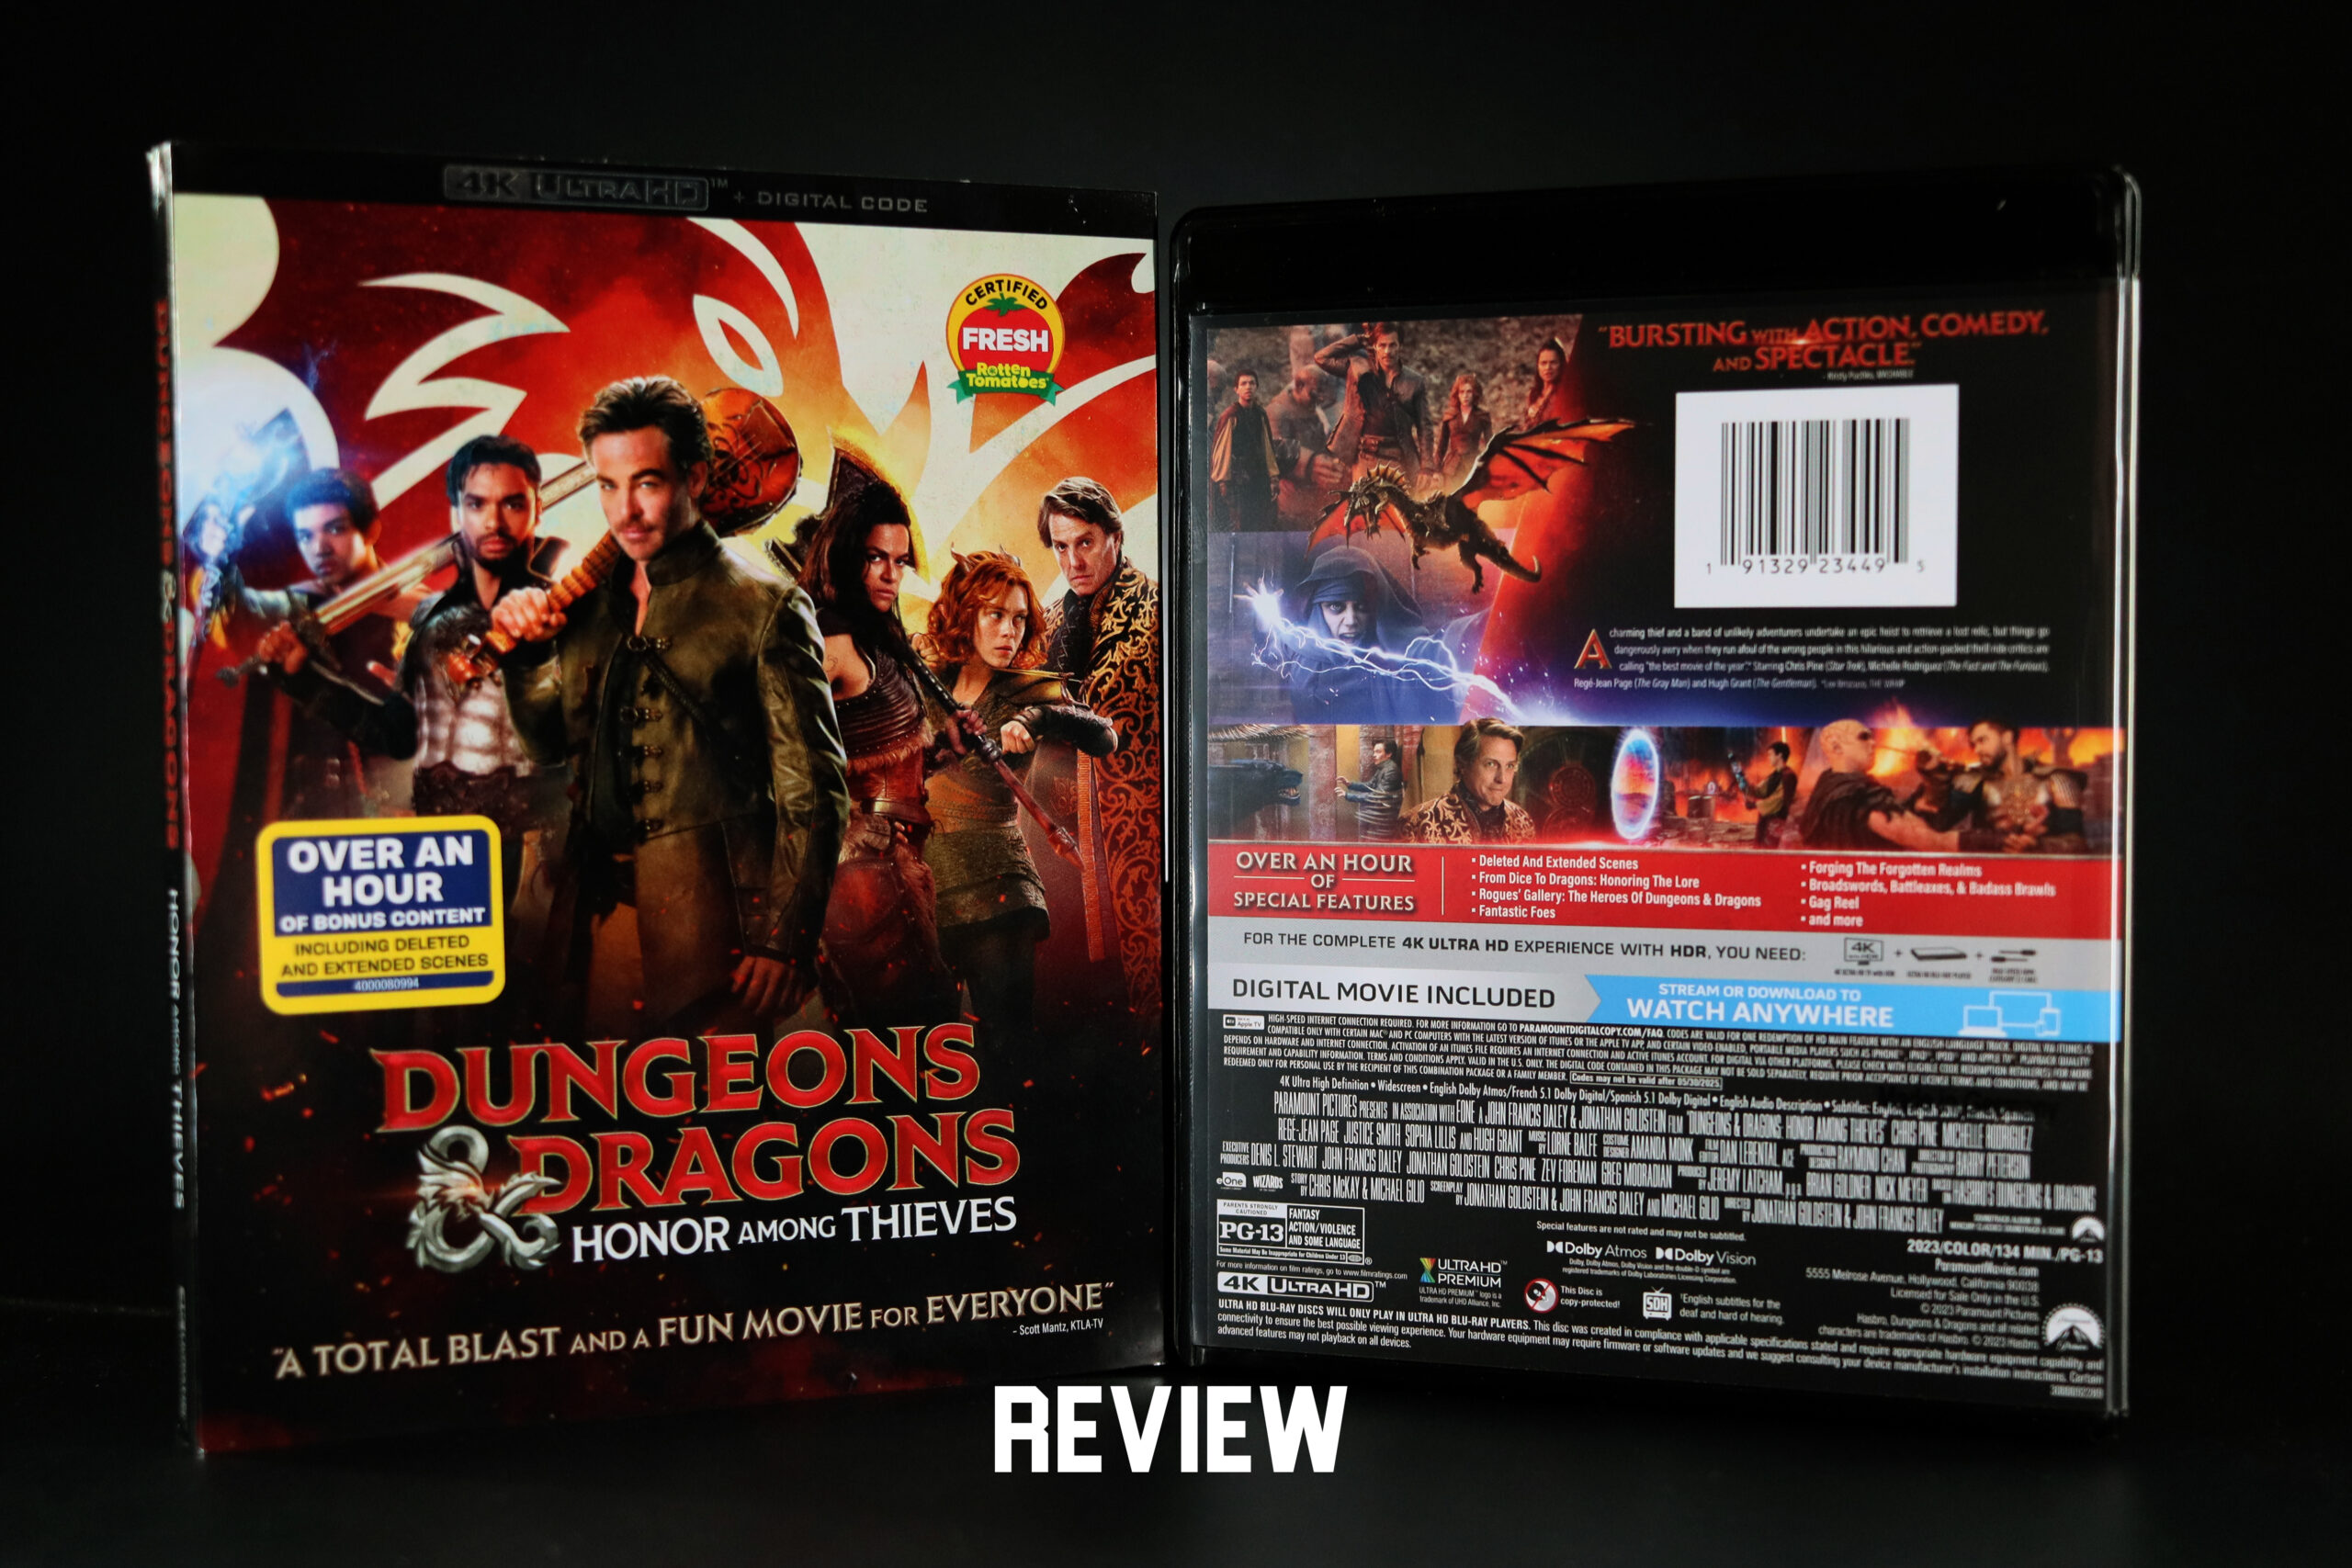 Dungeons & Dragons: Honor Among Thieves Home Media